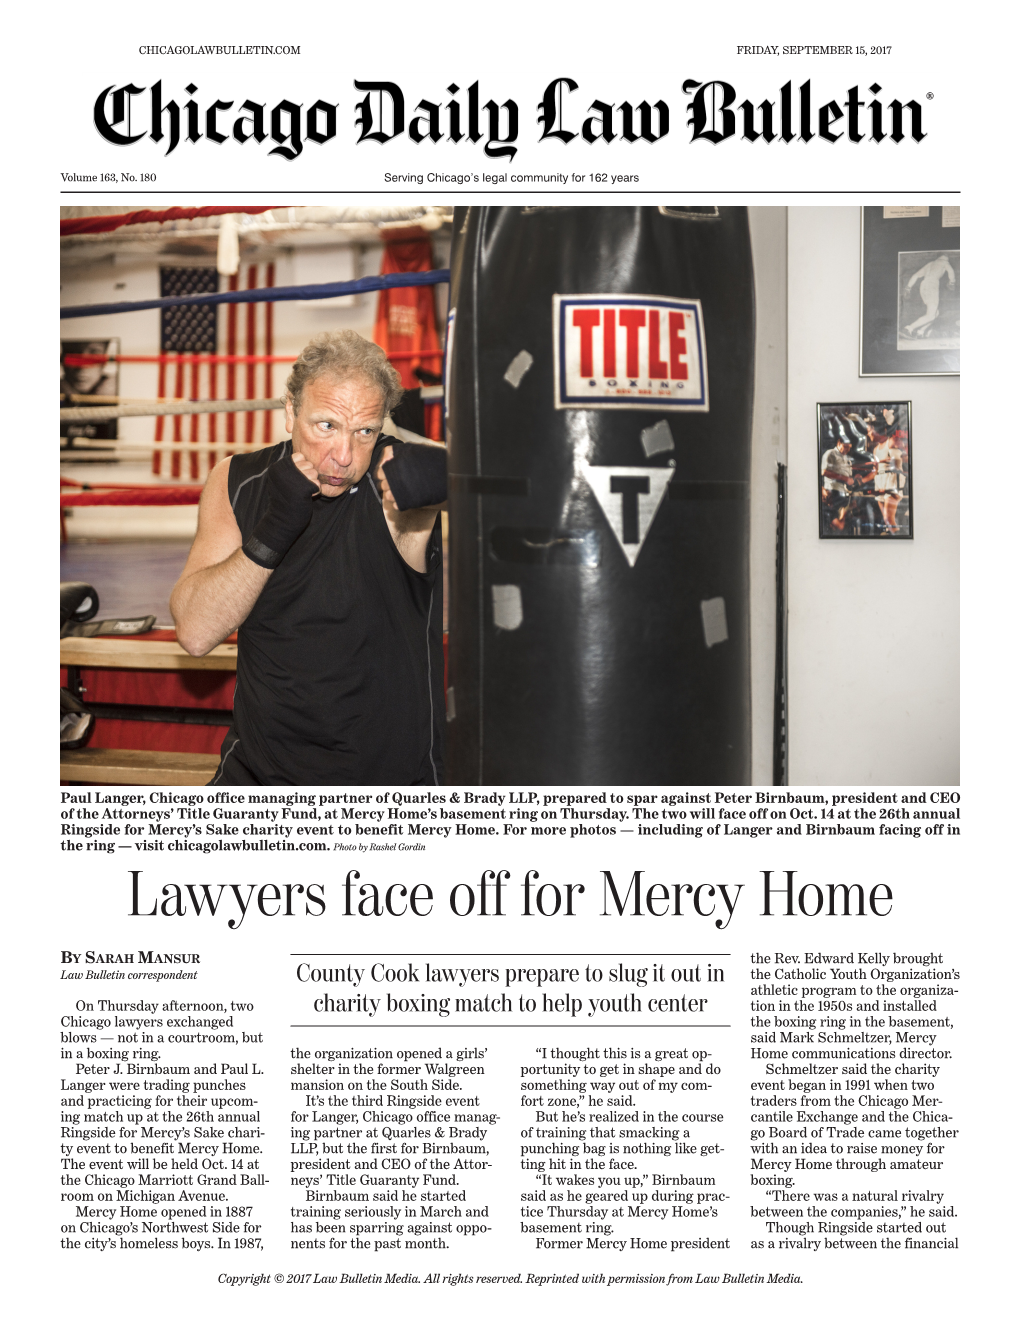 Lawyers Face Off for Mercy Home